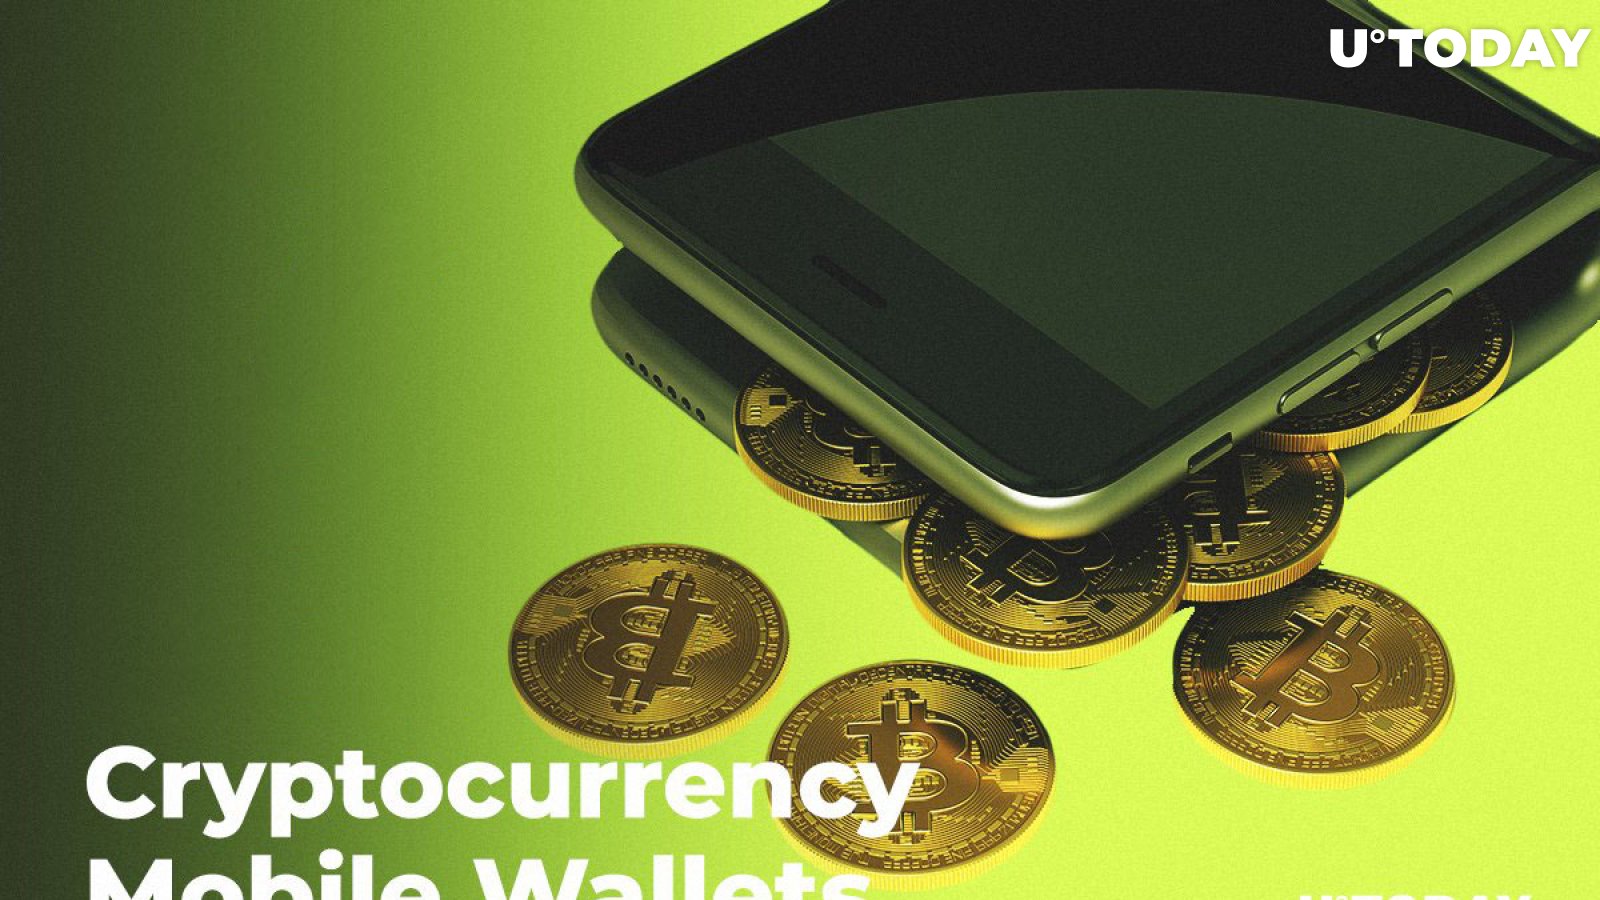 7 Popular Cryptocurrency Mobile Wallets 2019 for Android and iOS